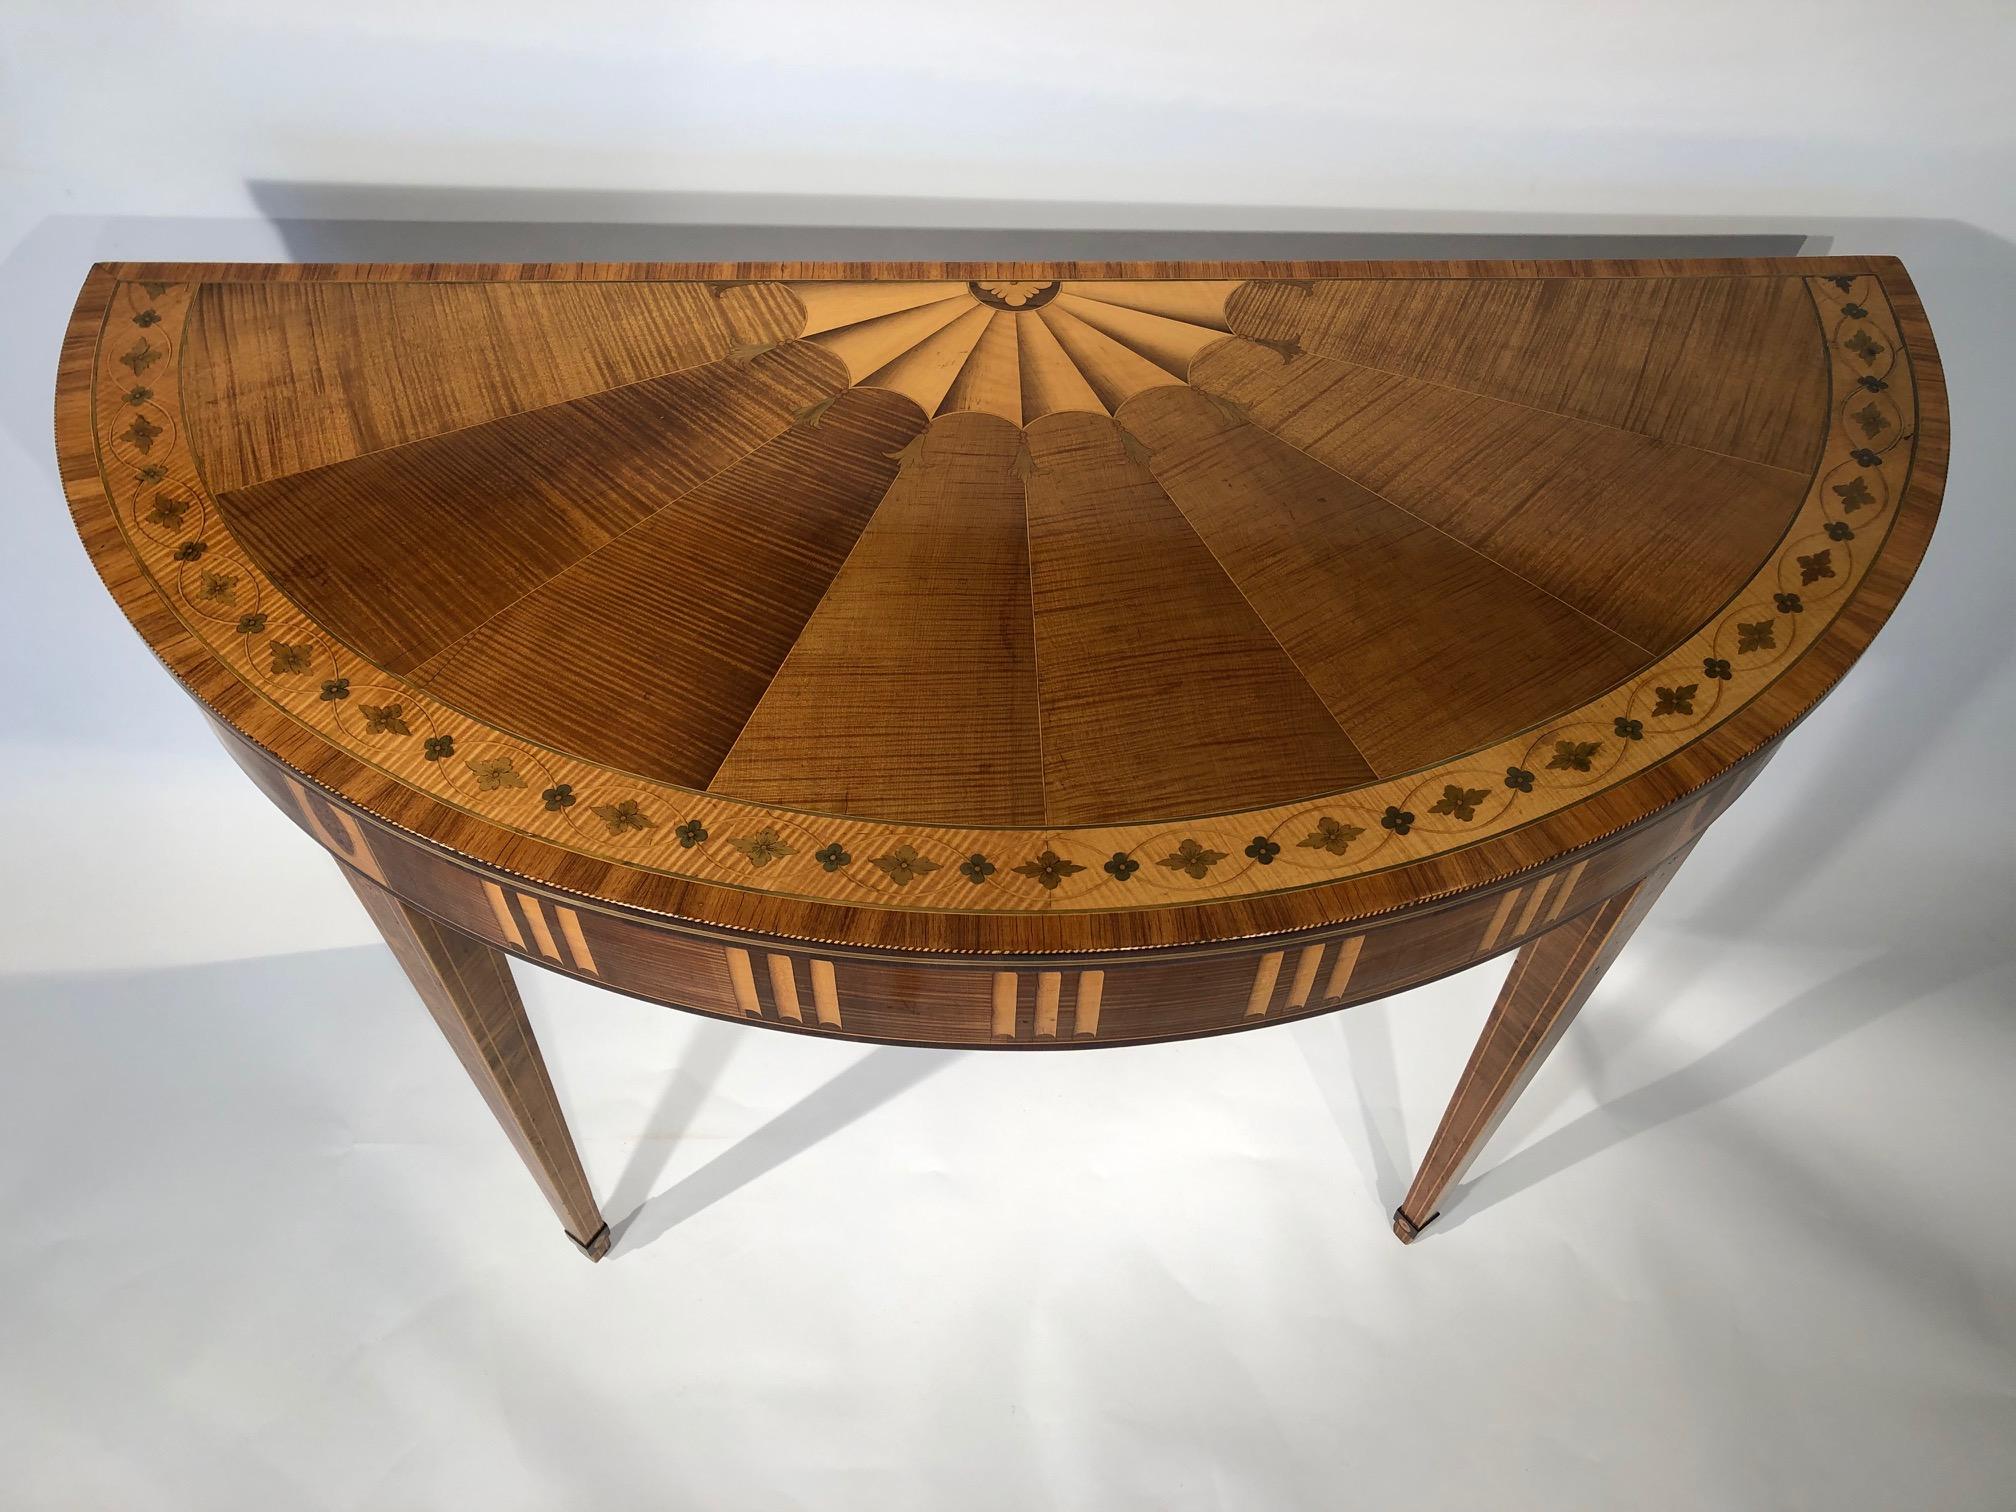 A very fine marquetry harewood demi-lune console table by William Moore of Dublin. The top has radiating paterae within a broad satinwood border enclosing alternating flowerheads. Crossbanded in tulipwood, boxwood and ebony as decoration. The frieze